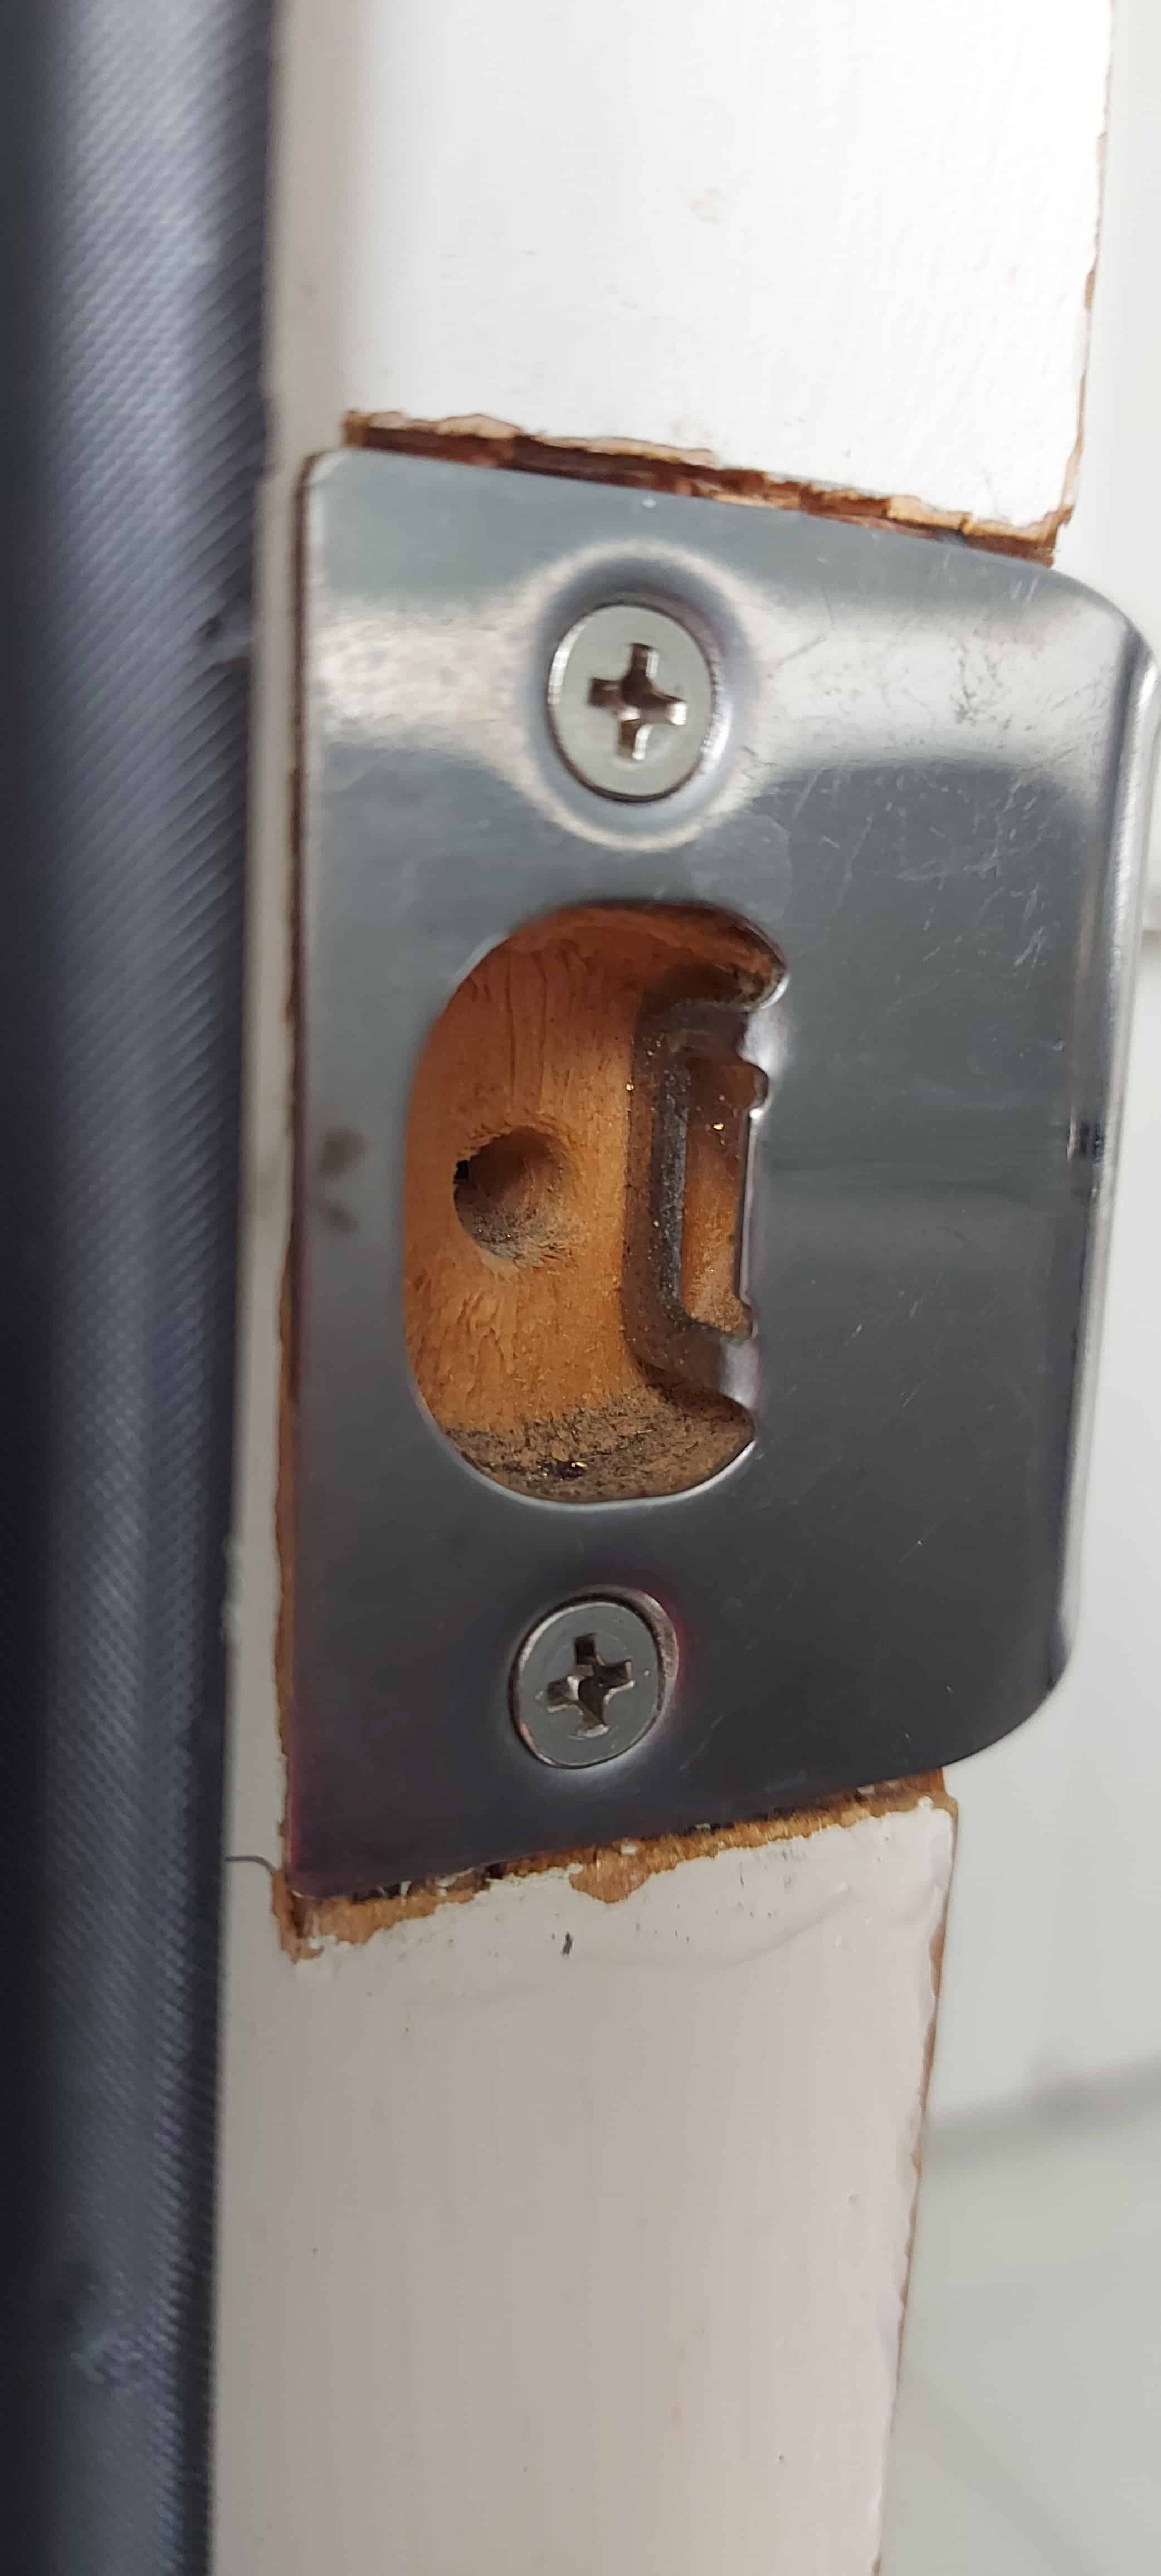 How necessary is a door knob strike plate?